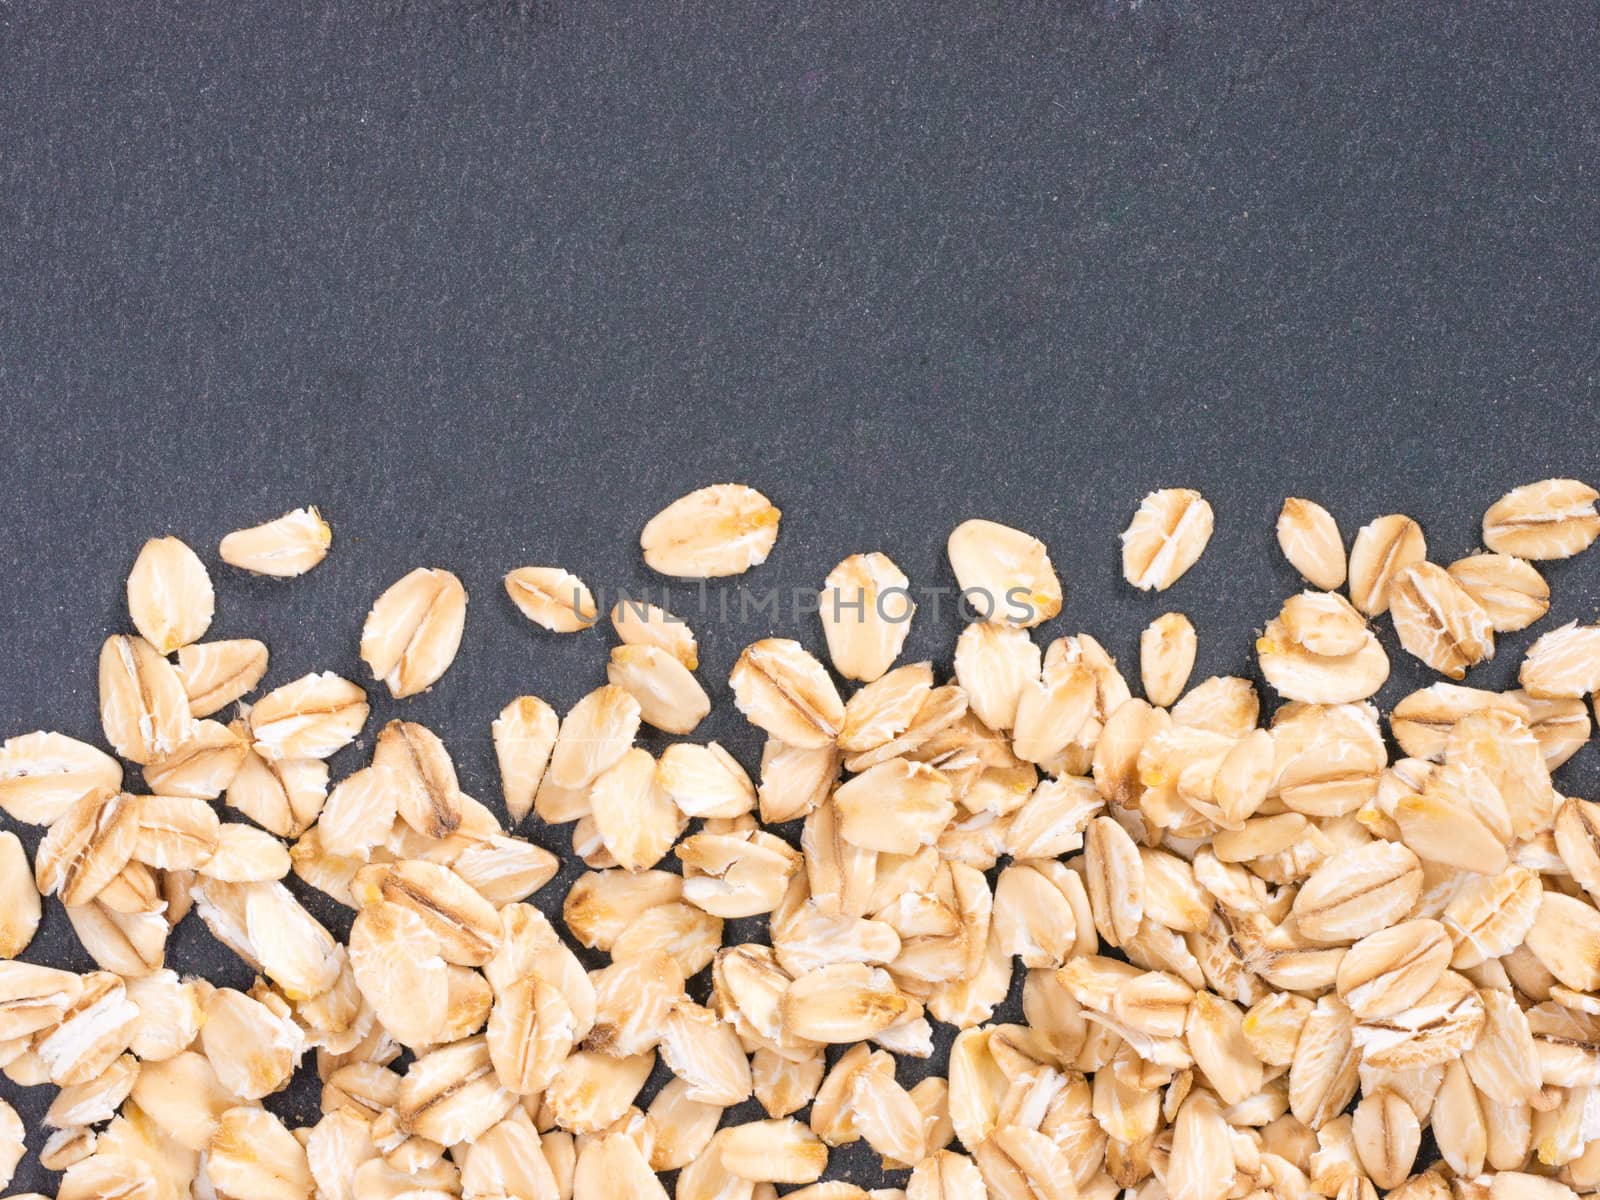 raw oatmeal on gray background with copy space. Isolated one edge. Top view or flat lay.